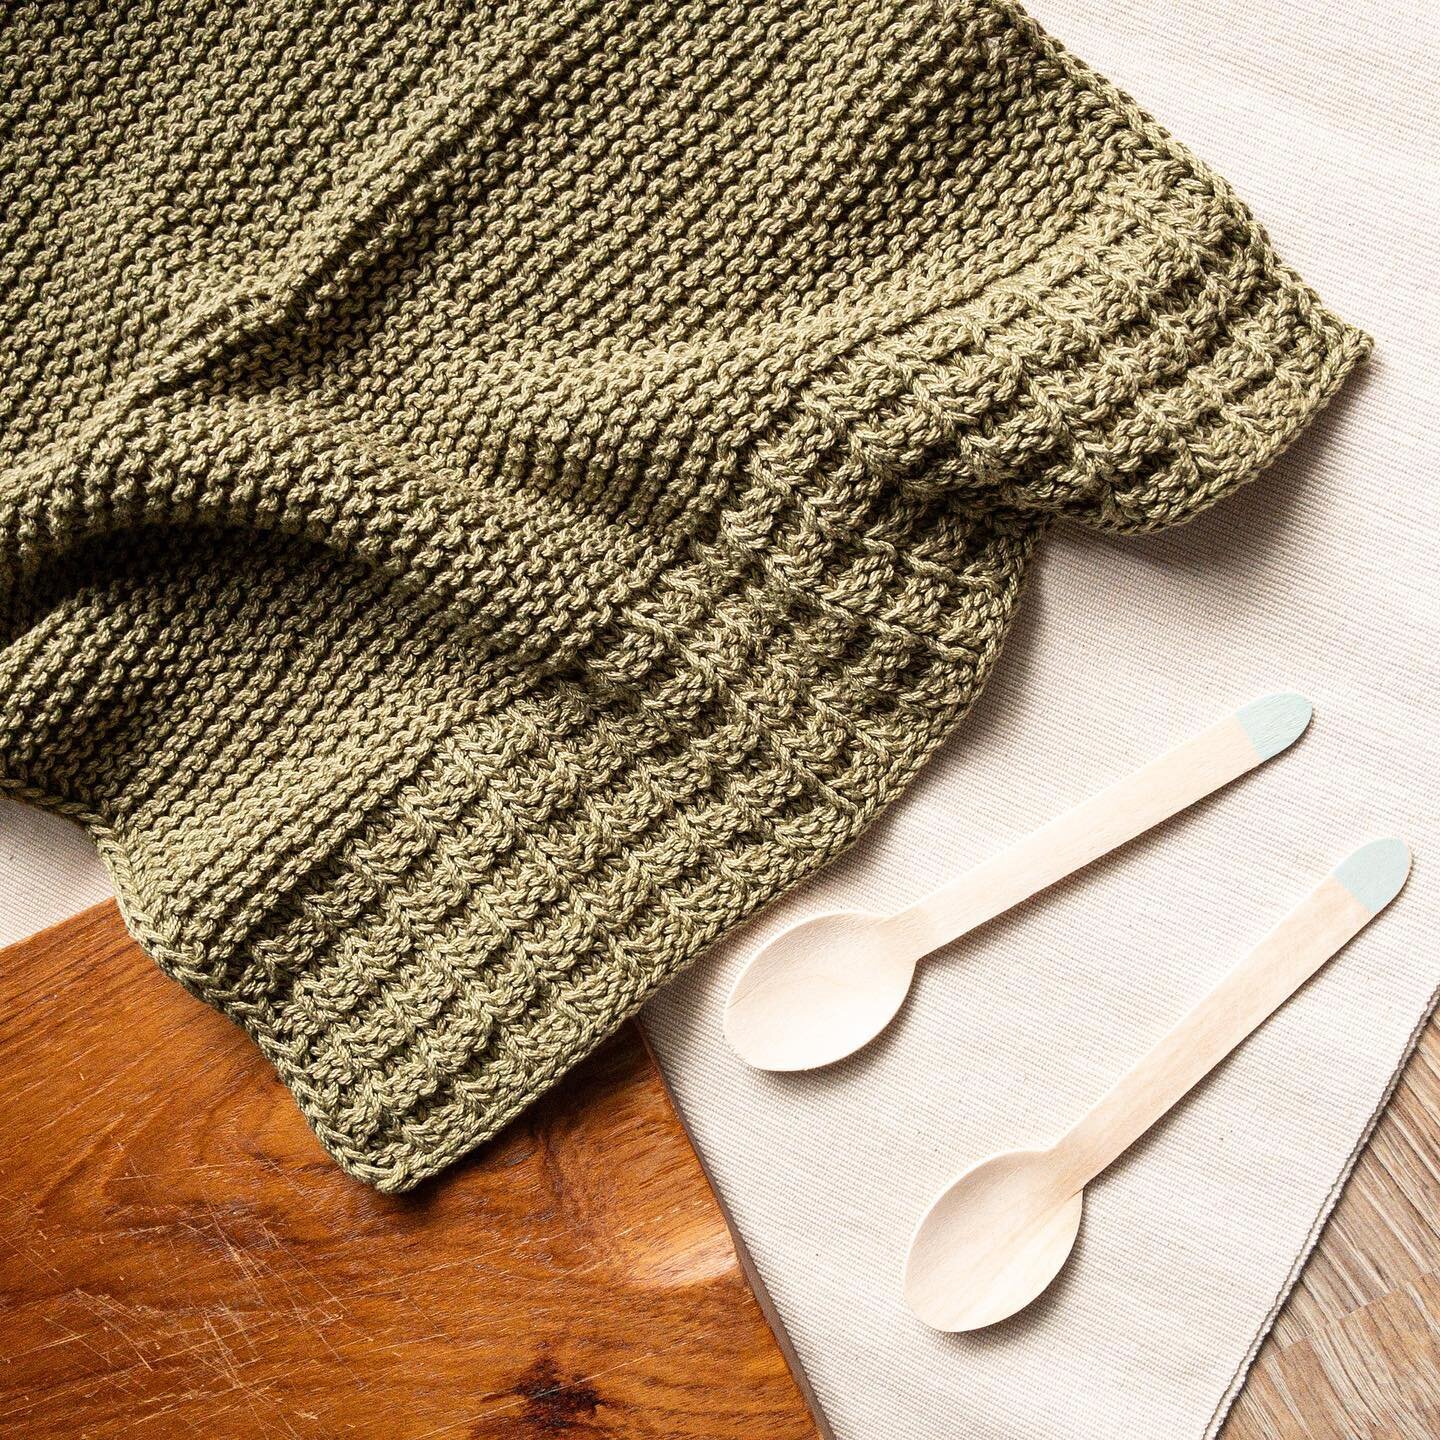 The heat wave arrived to Poland and honestly, it makes me wait impatiently for fall to come :) I've been trying to knit on a cozy sweater but it's just so hard in the heat, with the sweater covering me with its additional warmth!
 
That's why when th